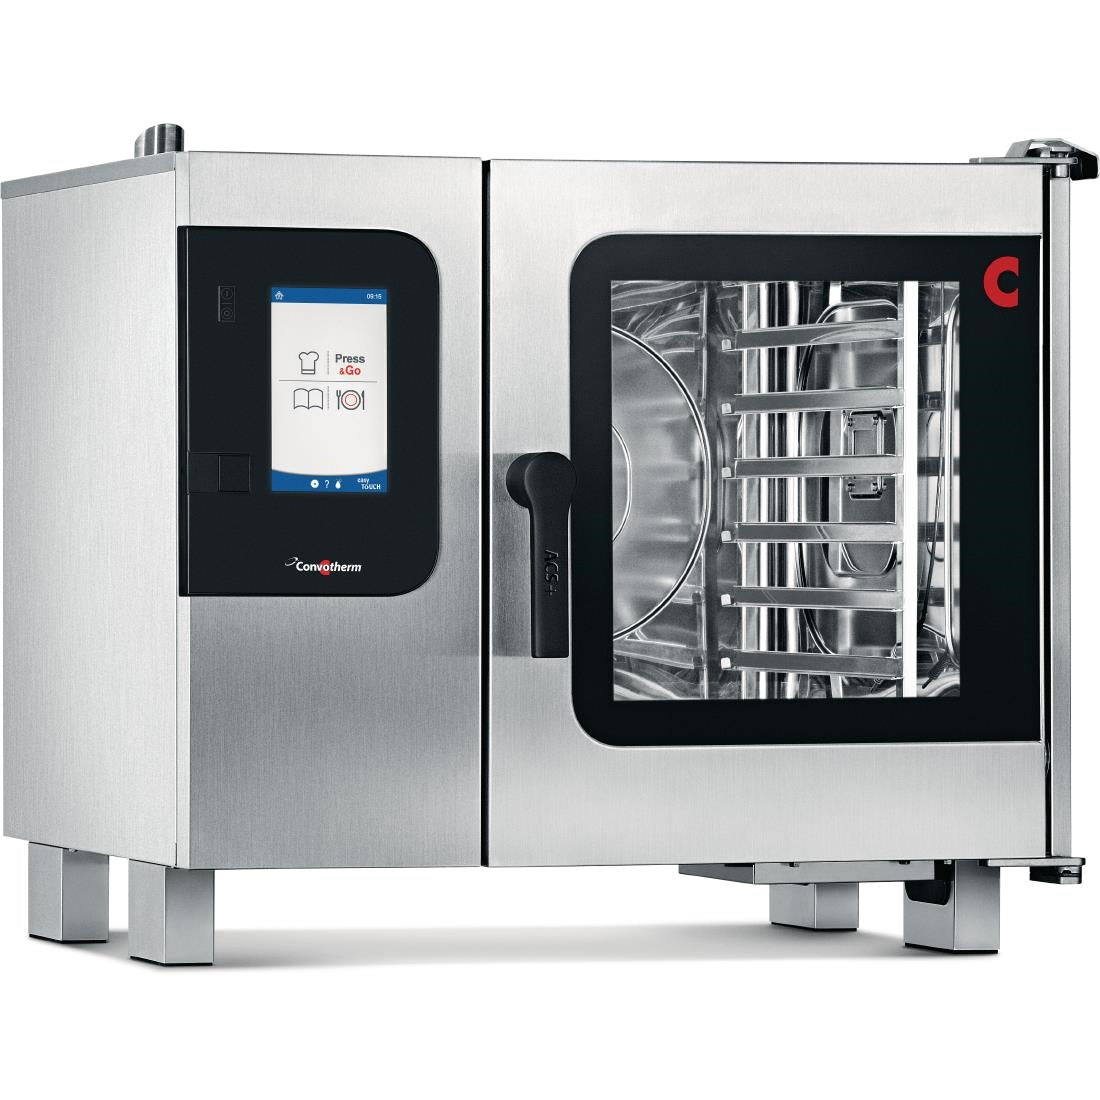 Convotherm 4 easyTouch Combi Oven 6 x 1 x1 GN Grid with ConvoGrill